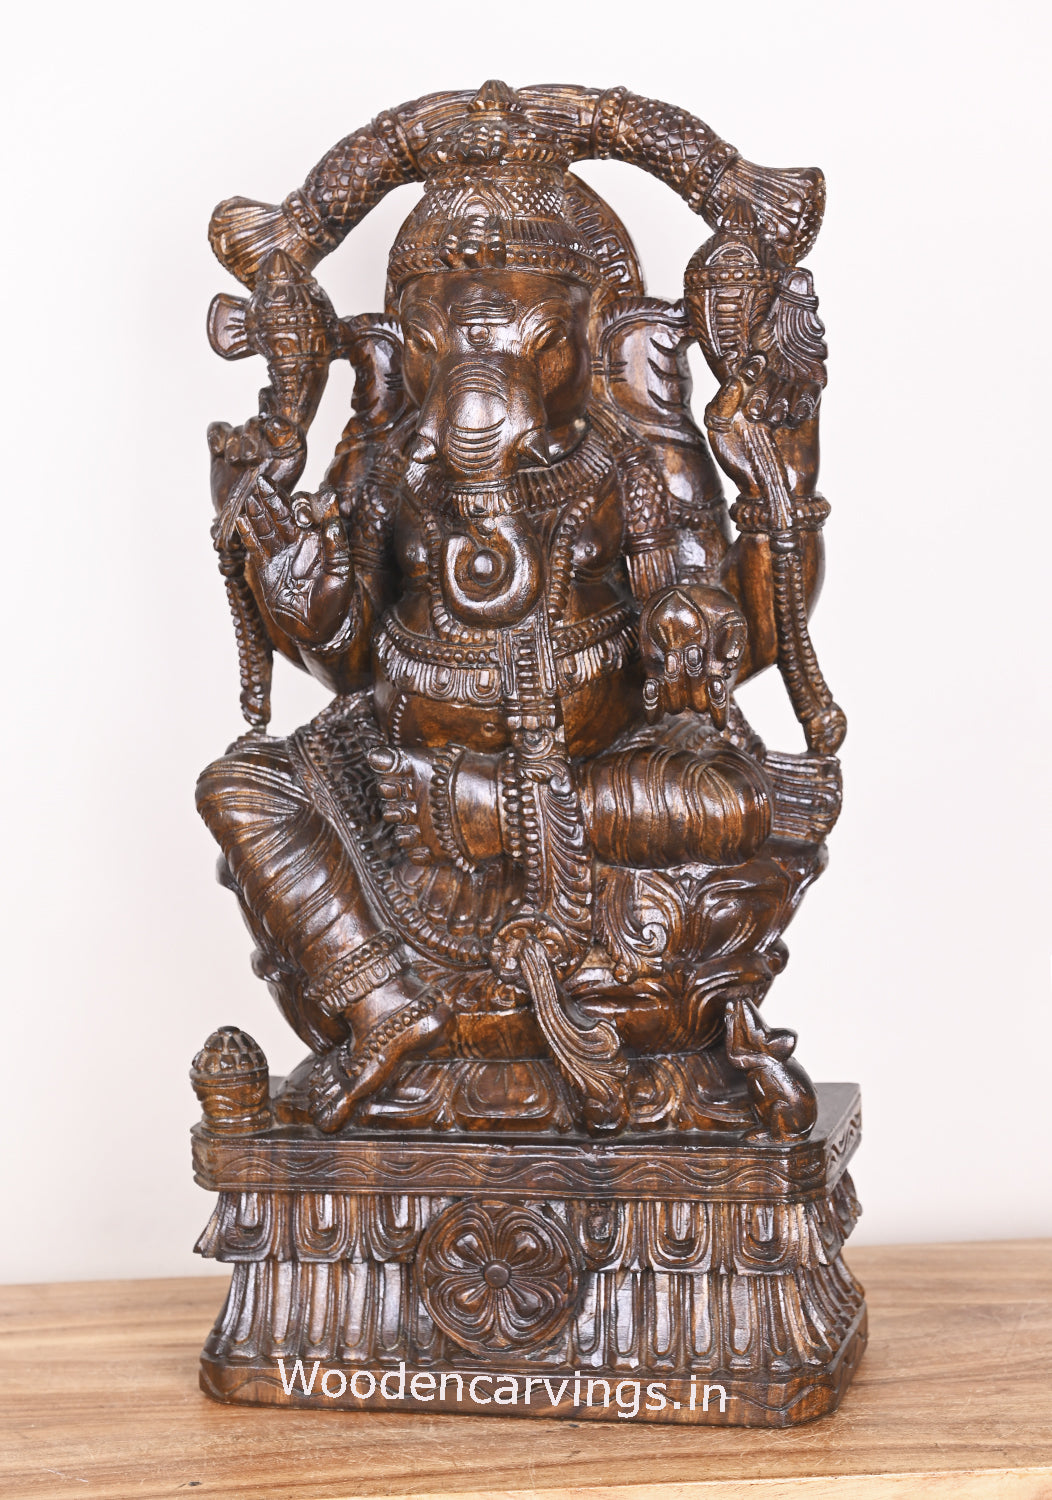 Decorative Lord Ganesha Carved With Beautiful Arch Garland Seated on Flower Lotus Polished Sculpture 25"